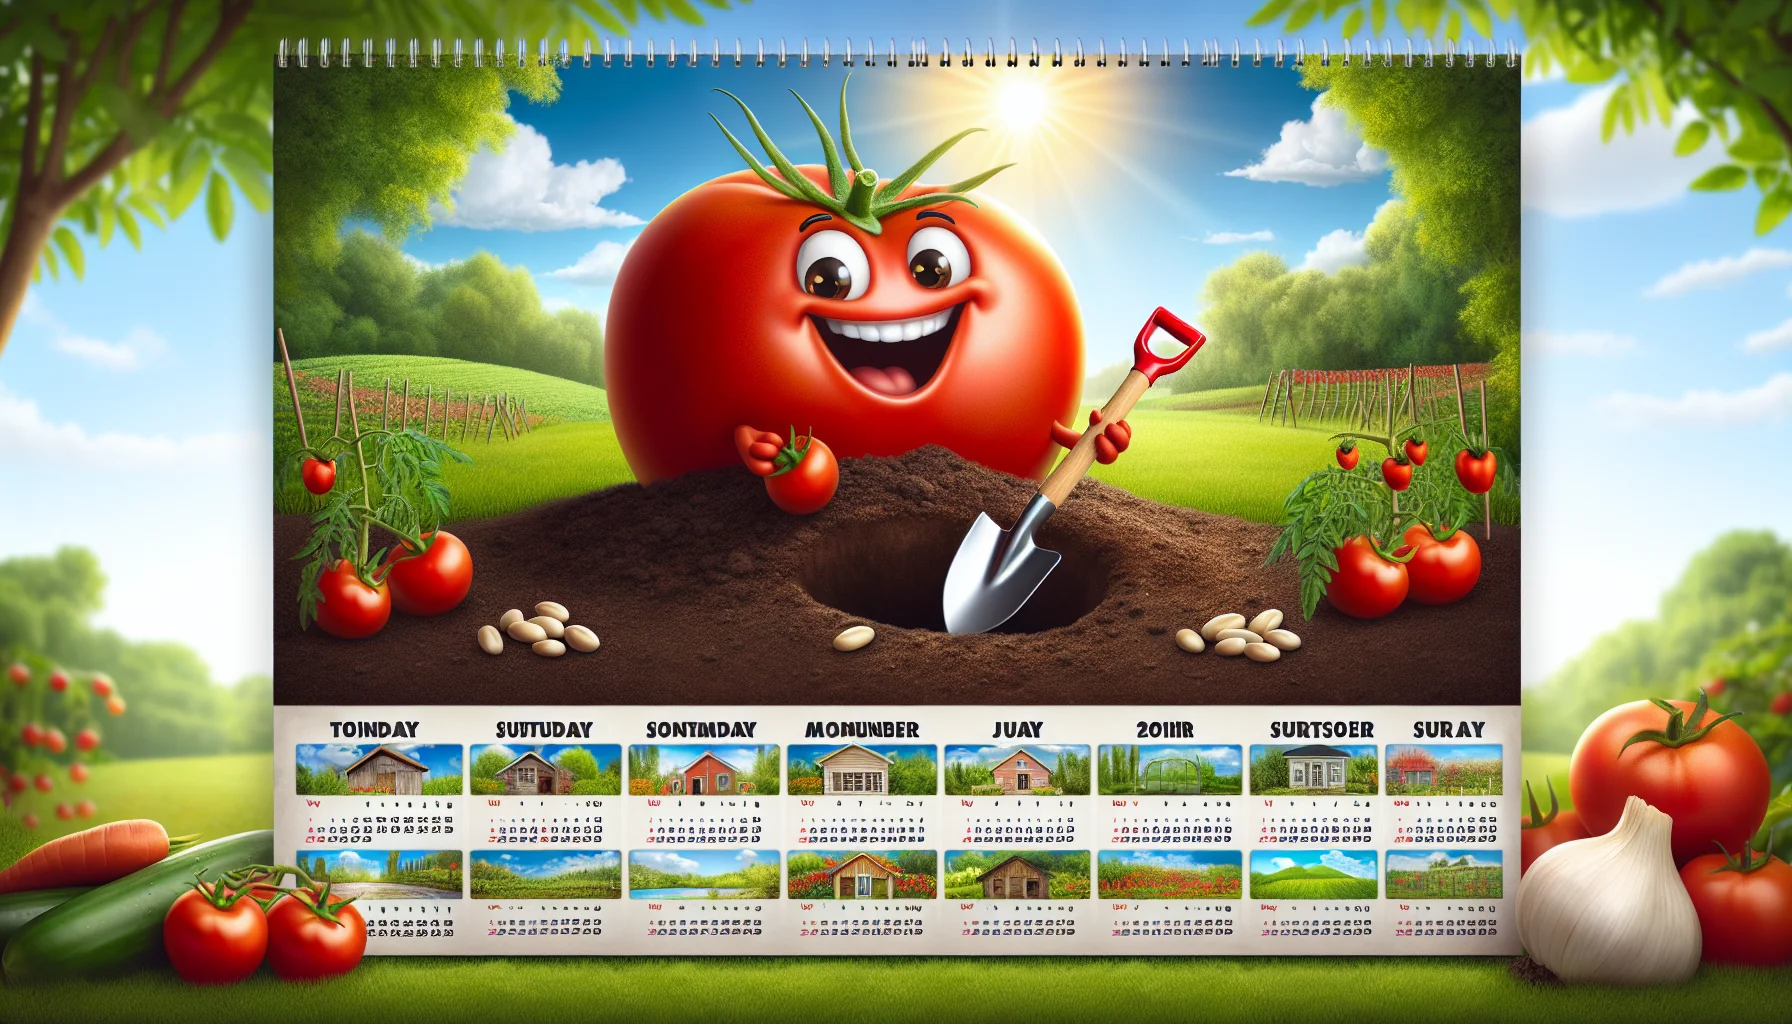 Imagine a humorous scenario of a calendar with the months represented as whimsical scenes. For the month that is the ideal planting season for tomatoes, depict a plump red tomato smiling broadly with a tiny shovel in its vine, excitedly burying tomato seeds in well-nourished garden soil. The remaining months show different vegetables, architectural representations or scenic landscapes, reflecting the change of seasons. The backdrop shows a vibrant green garden under a bright, cheerful sun, creating an inviting atmosphere, prompting viewers to enjoy gardening.